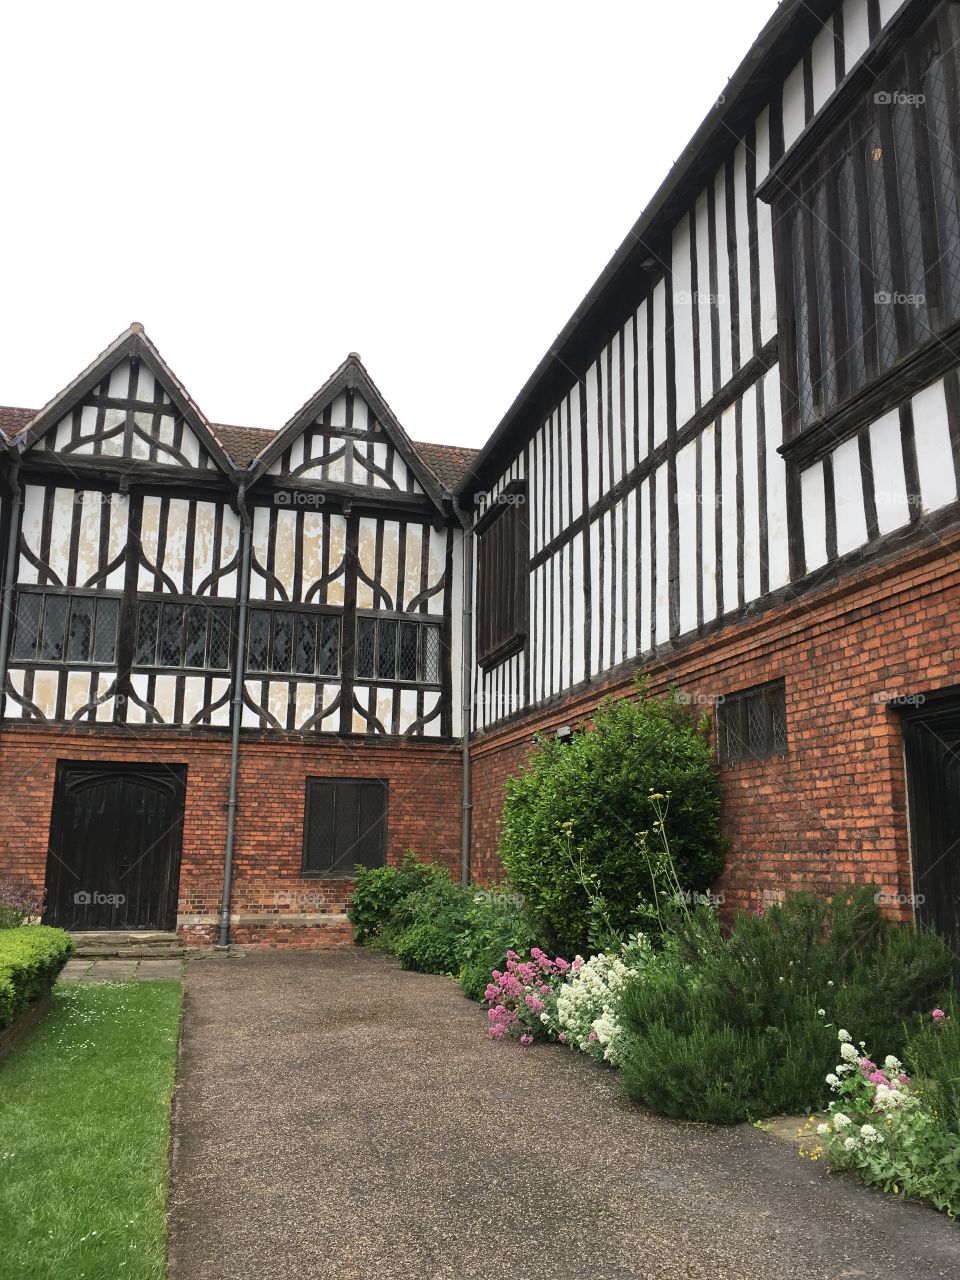 Exterior view of brickwork and timber framing of the mediaeval Manor House of Gainsborough Old Hall in England